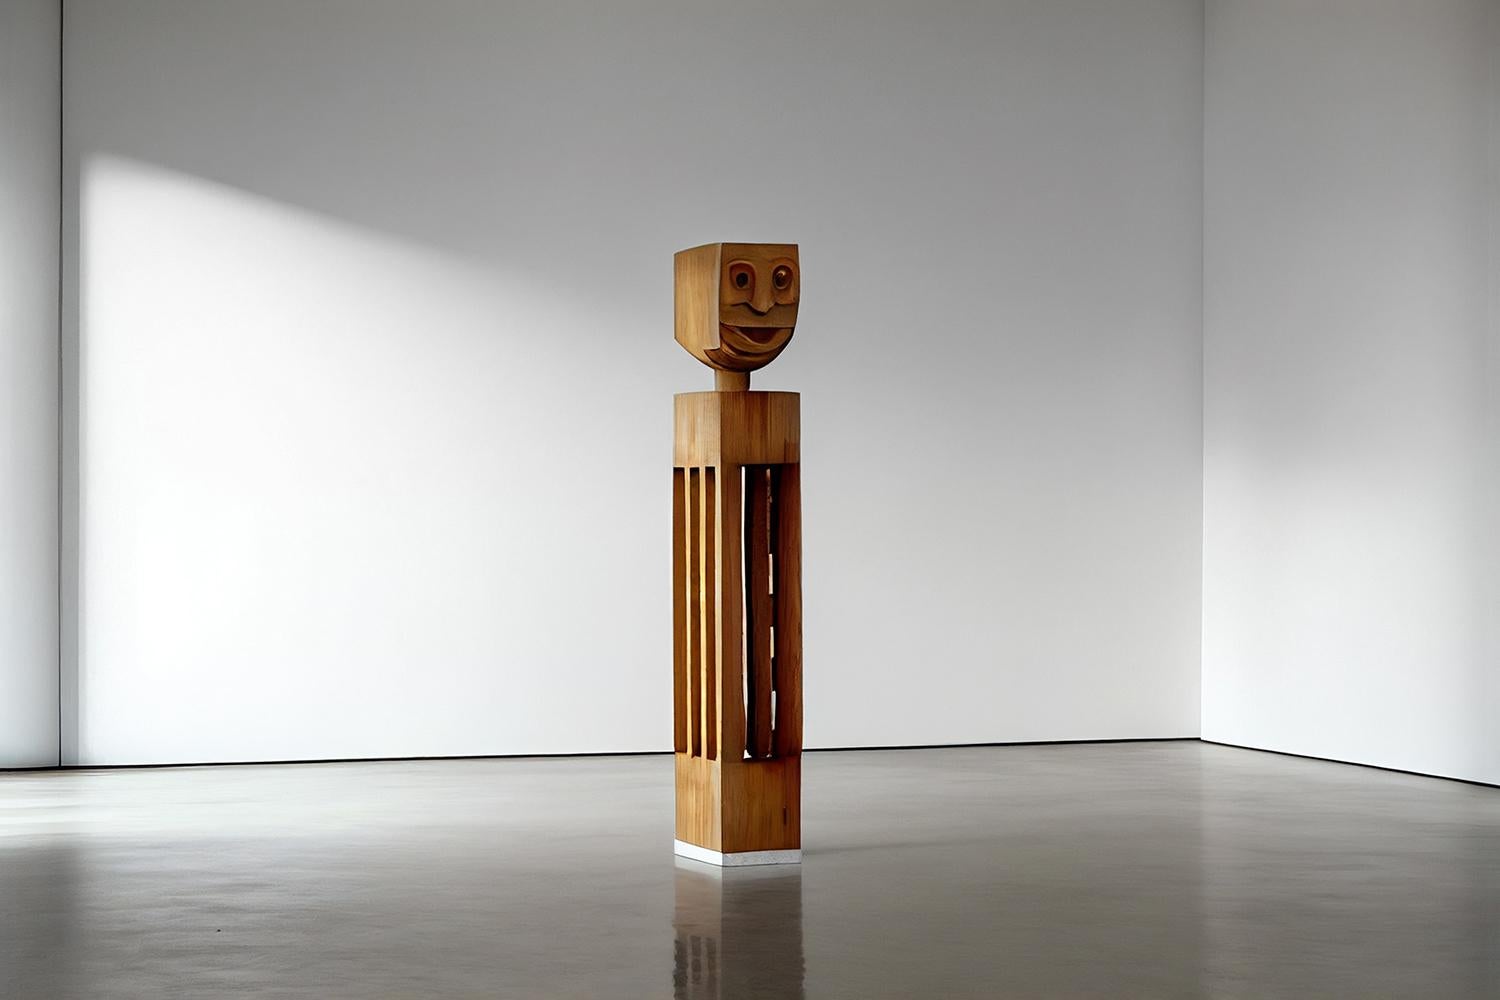 Figurative Wood Sculpture Inspired in Constantin Brancusi art, 3 Kings by NONO

NONO Furniture Company introduces the 3 Kings, a set of three monumental totems inspired by the works of Constantin Brancusi.
 
The 3 Kings are a handcrafted